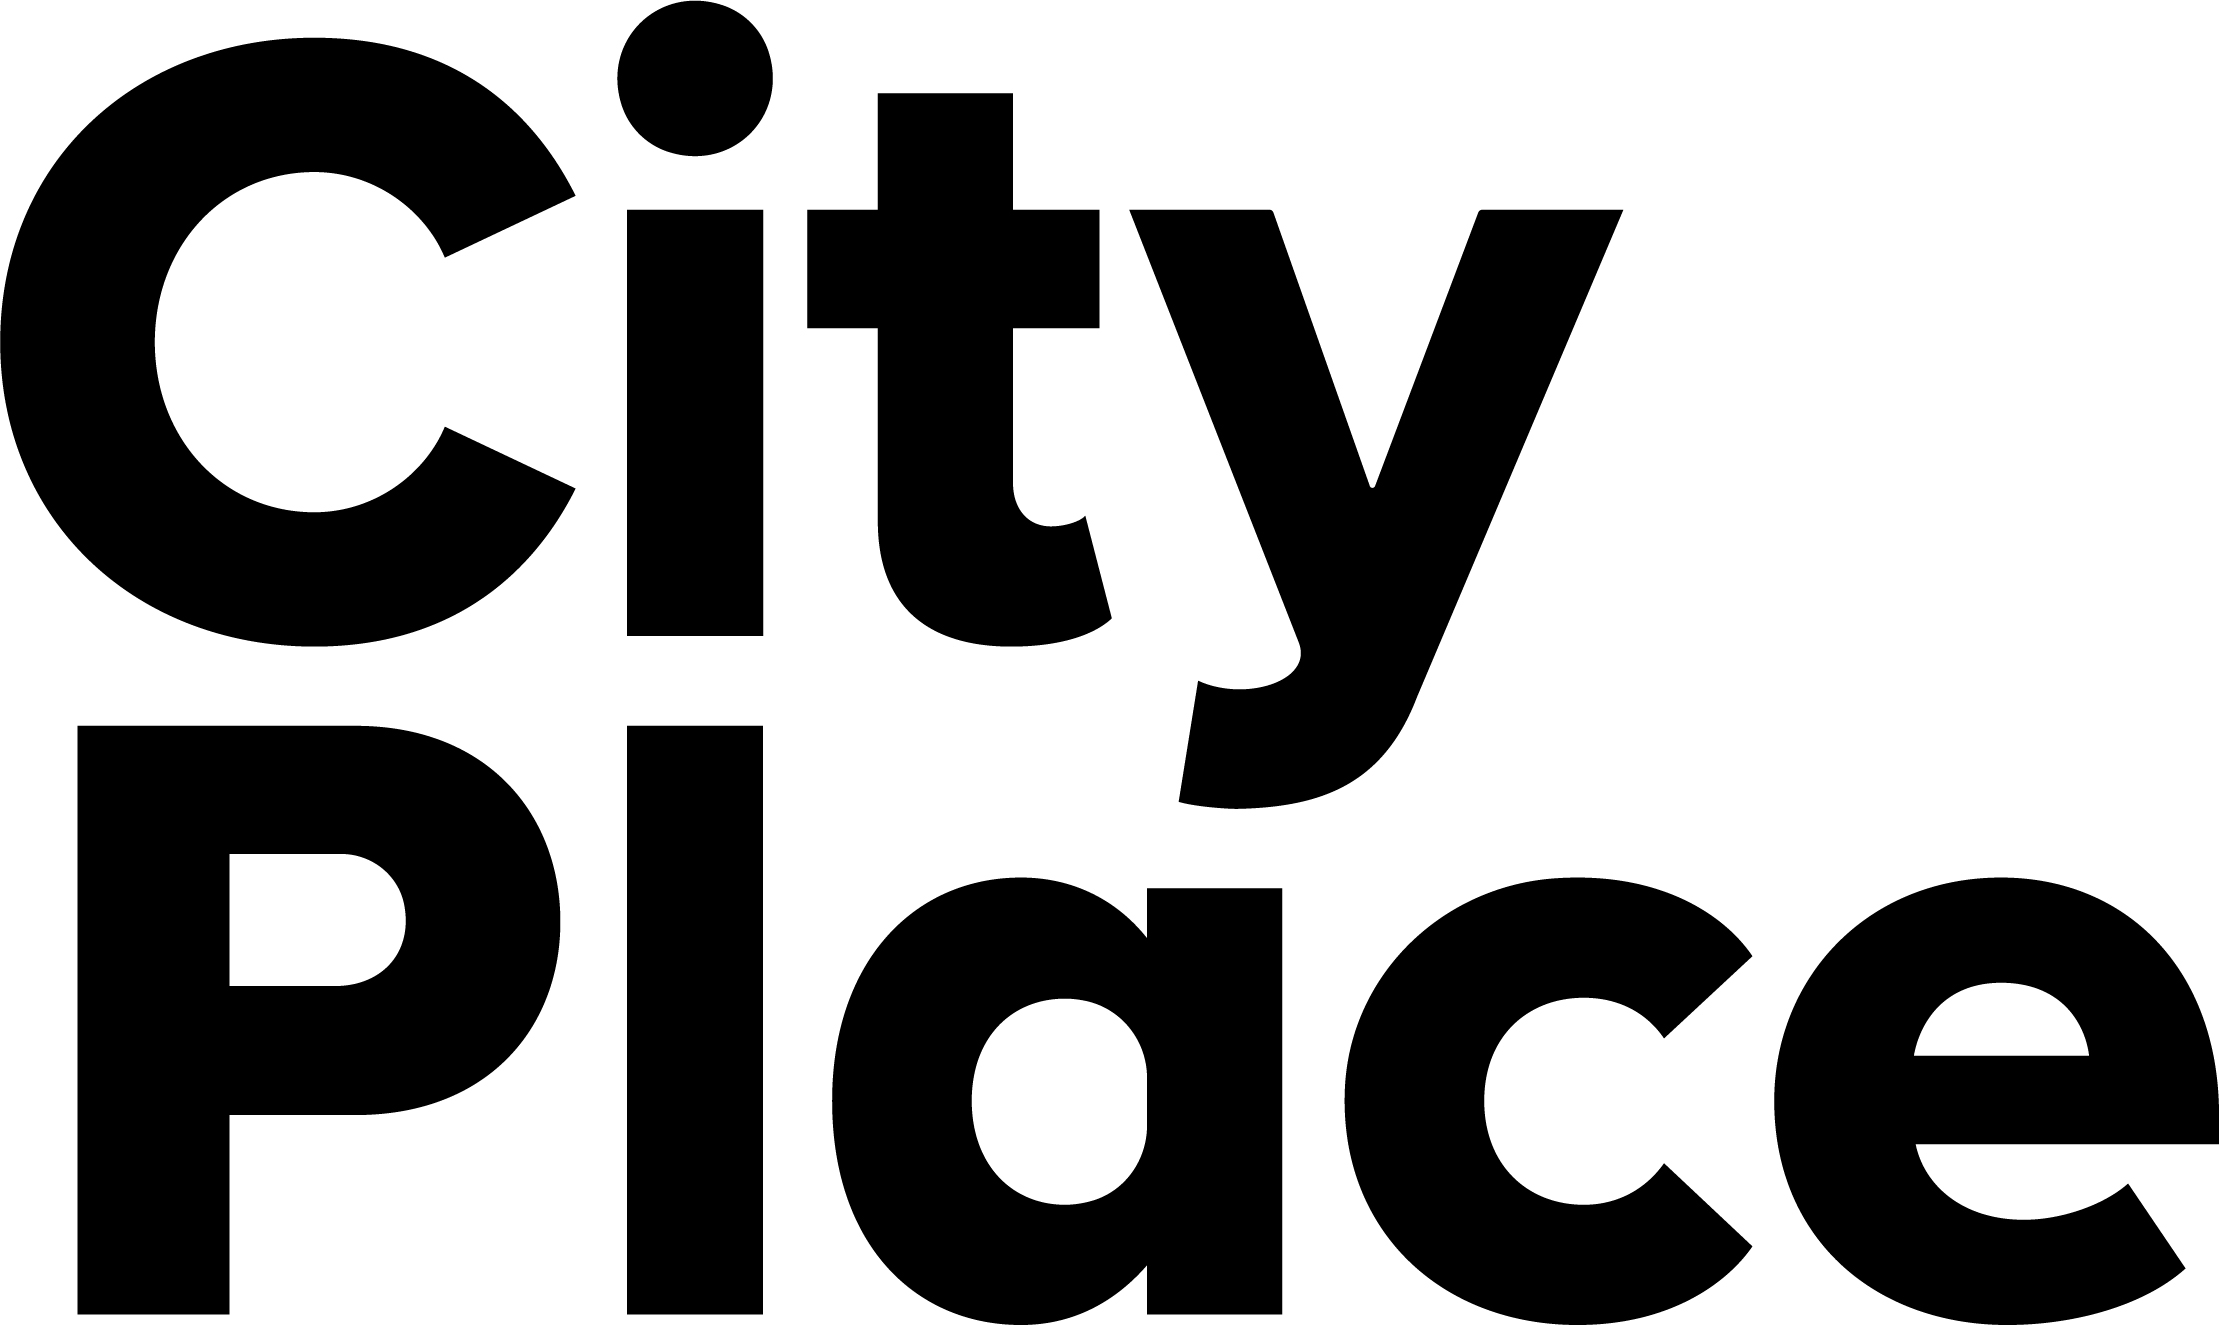 Springwoods Village will now be known has City Place.